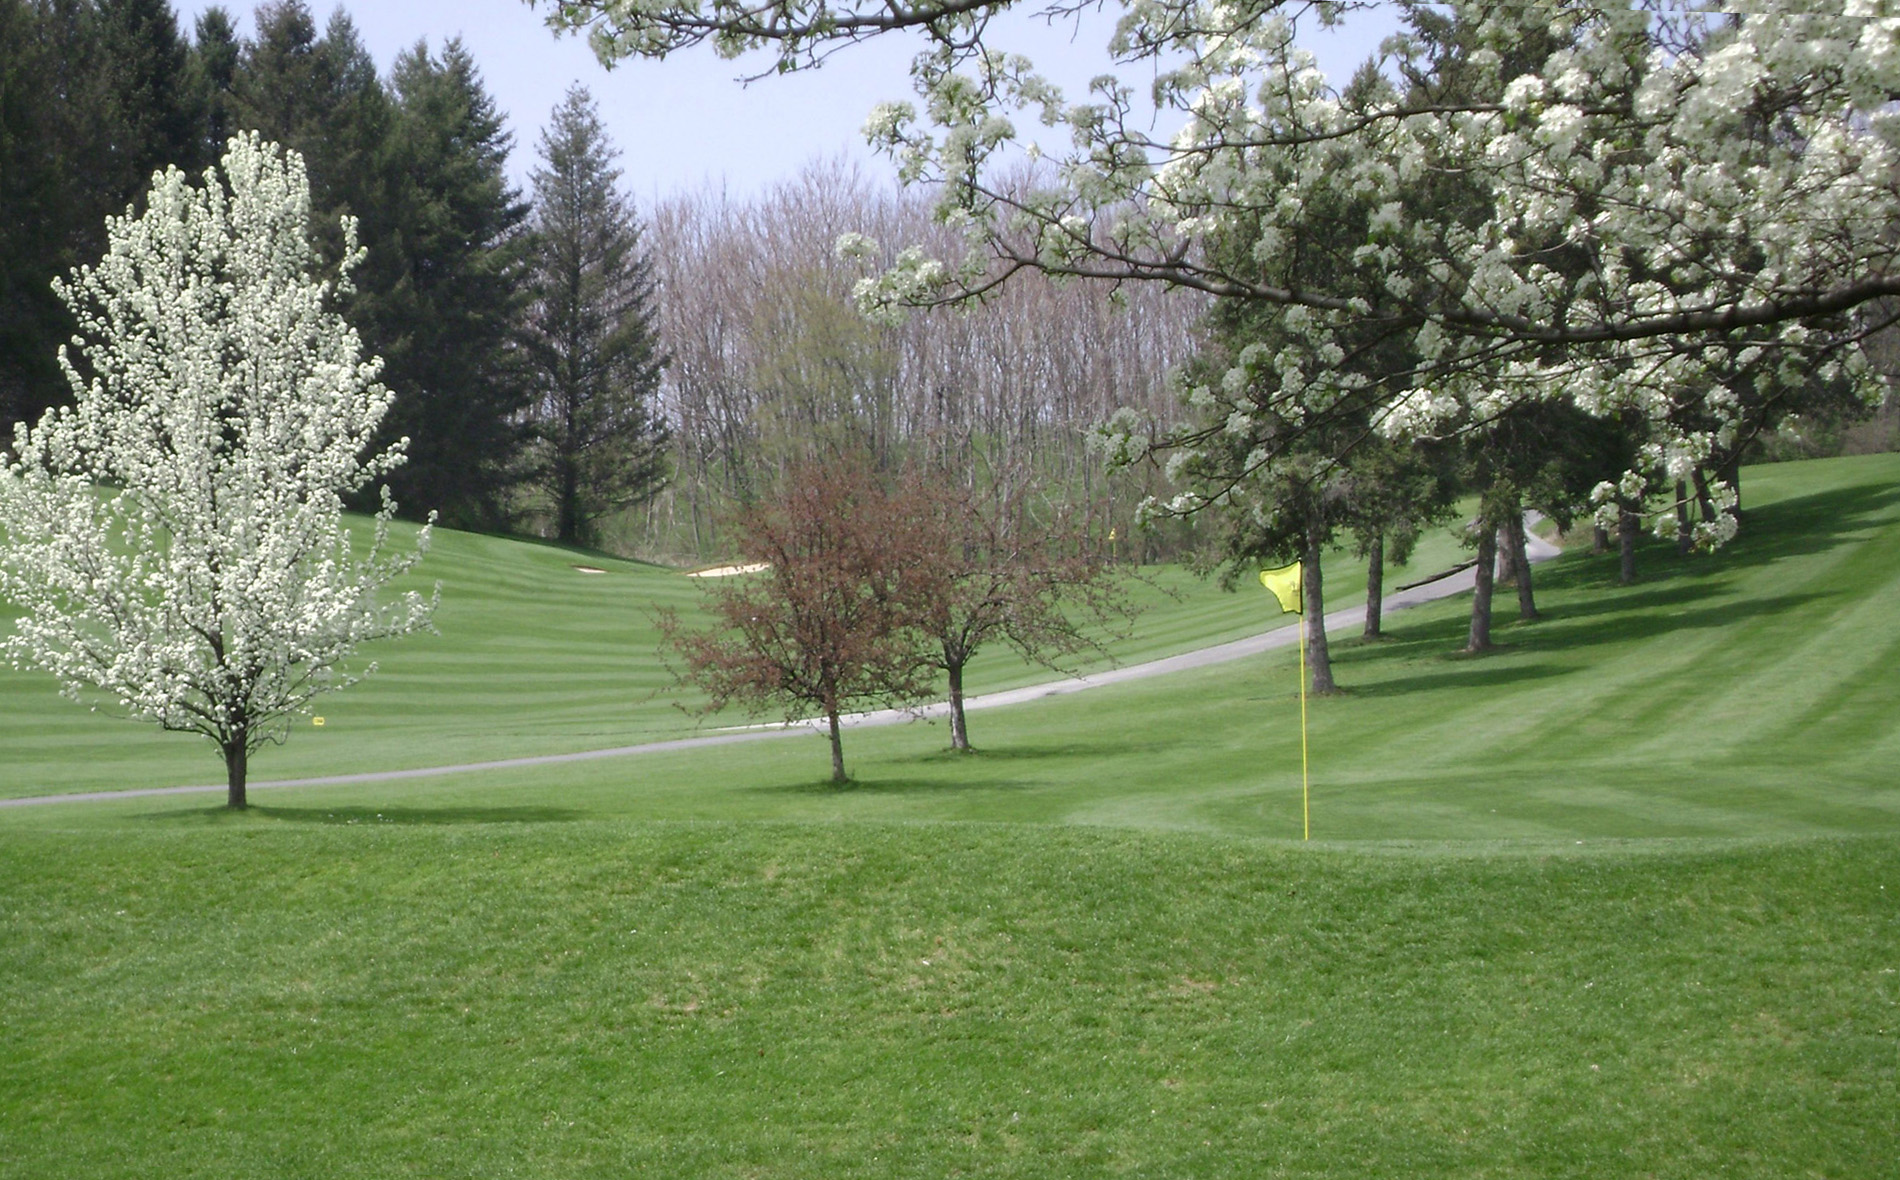 view of golf course green with trees